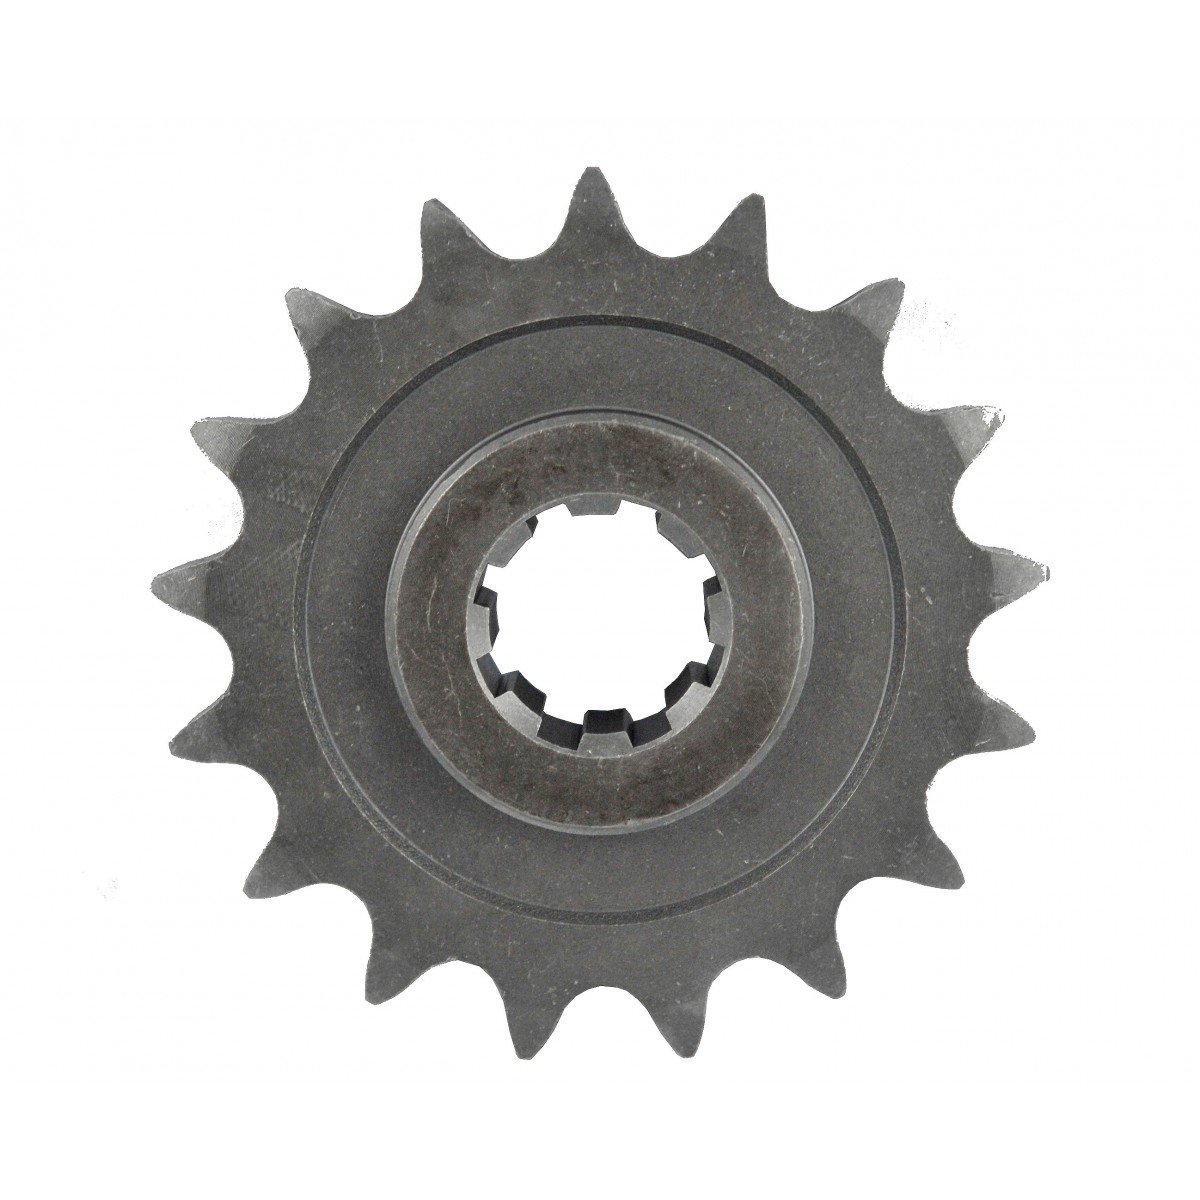 Sprocket of the 17T Drive Chain of the SB Tiller 150x40 mm Lower